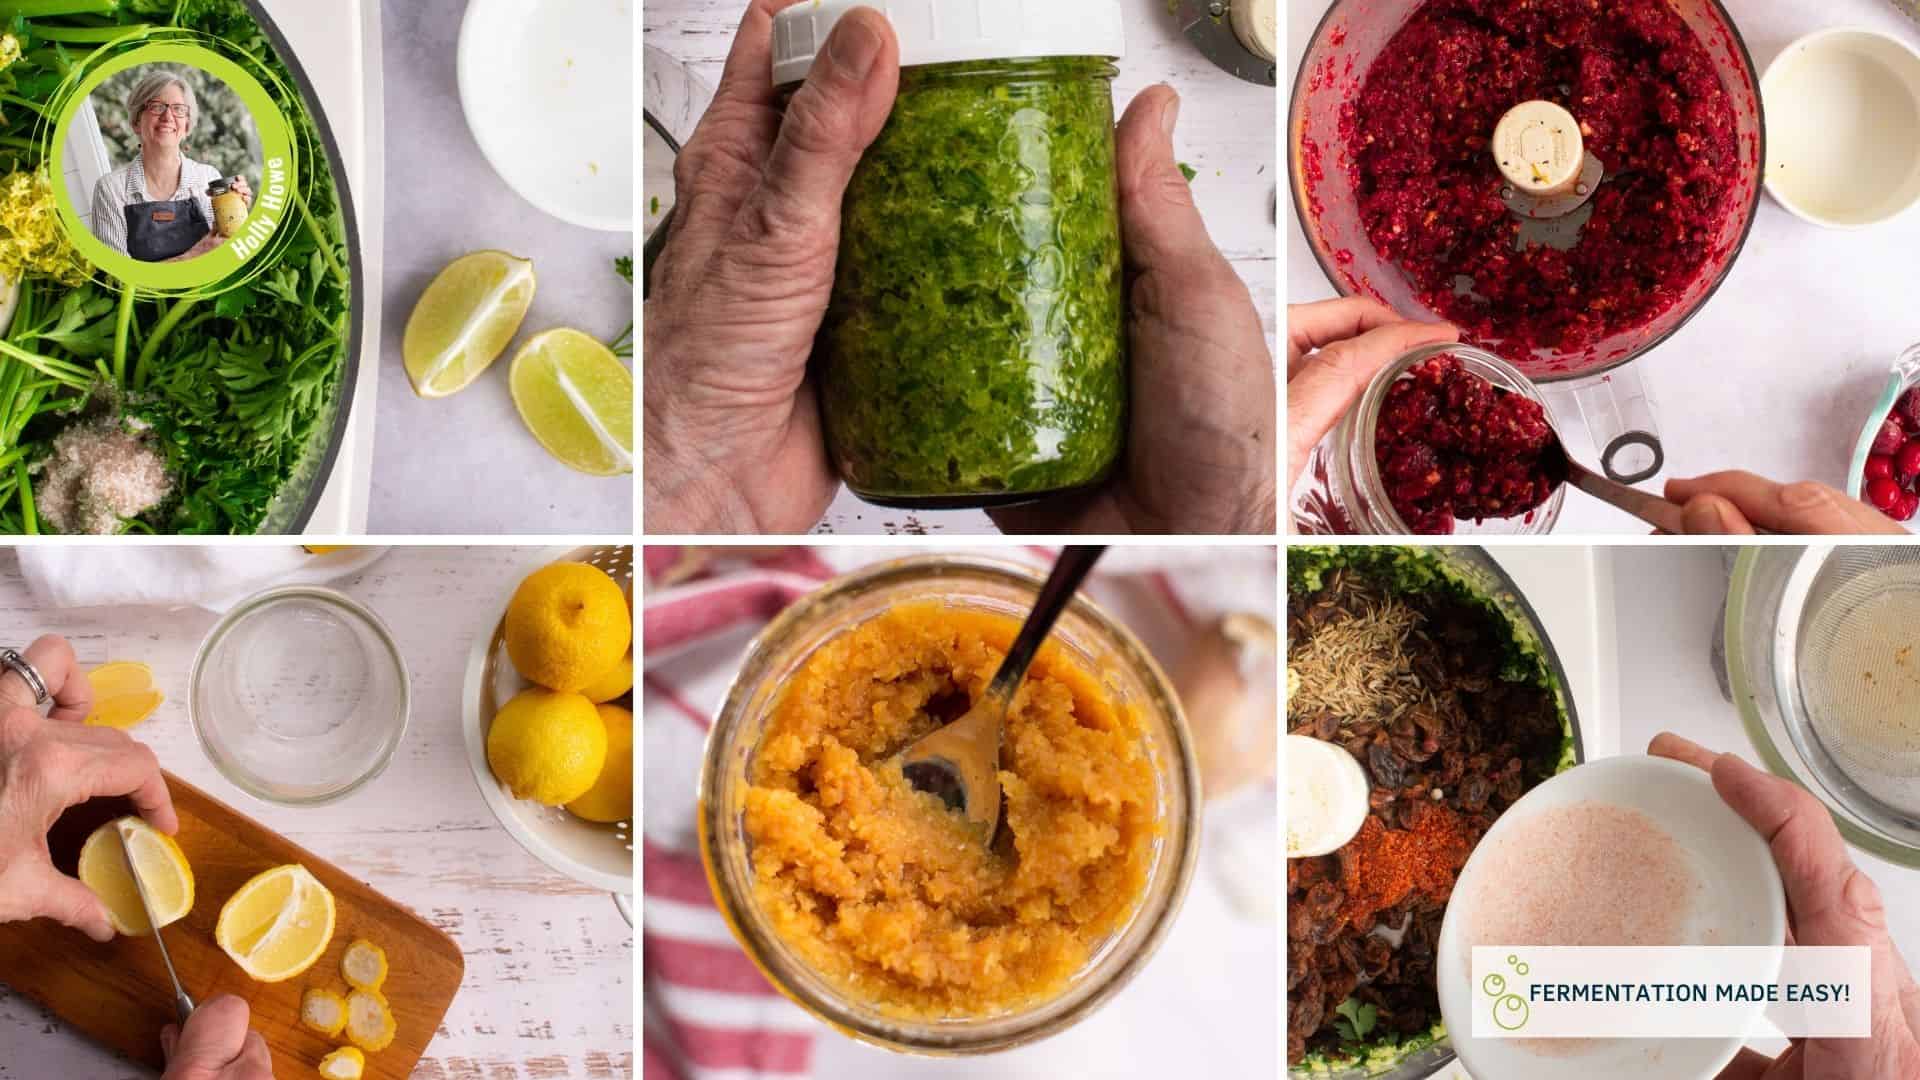 A six grid image showing different pastes, relishes and chutneys. | MakeSauerkraut.com